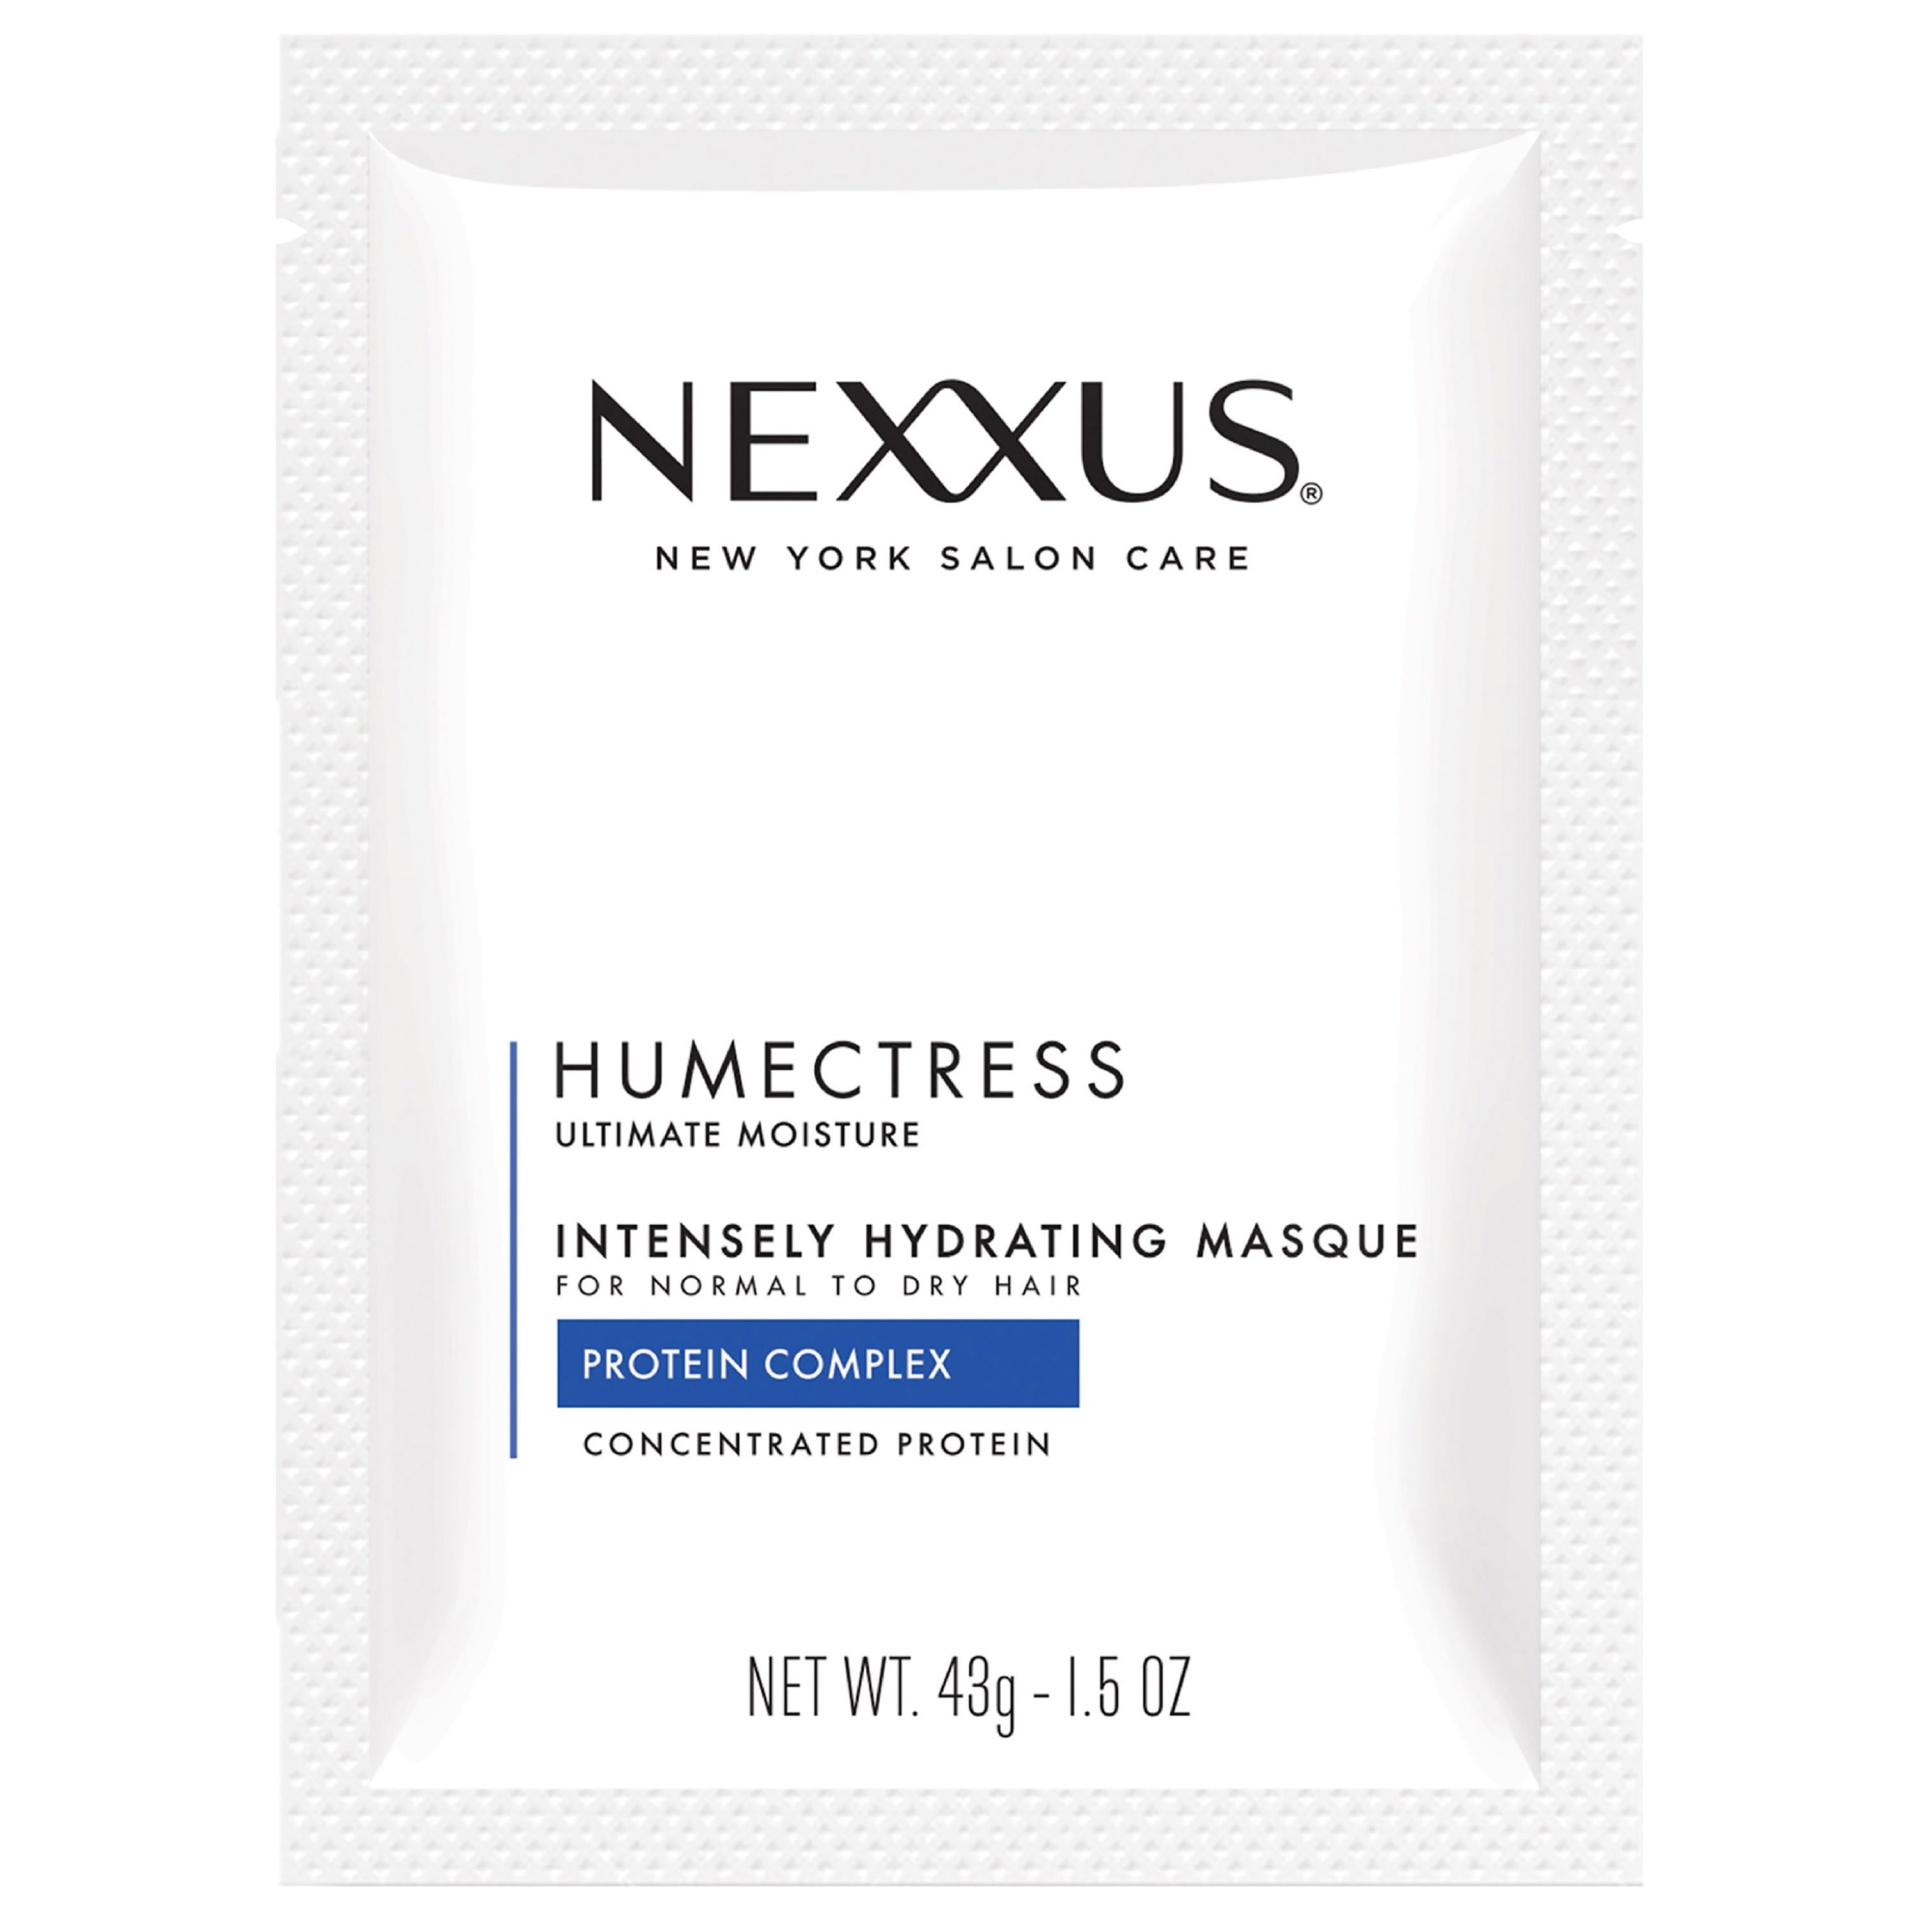 slide 1 of 7, Nexxus New York Salon Care Humectress Ultimate Moisture Protein Complex Intensely Hydrating Masque - 1.5oz, 1.5 oz